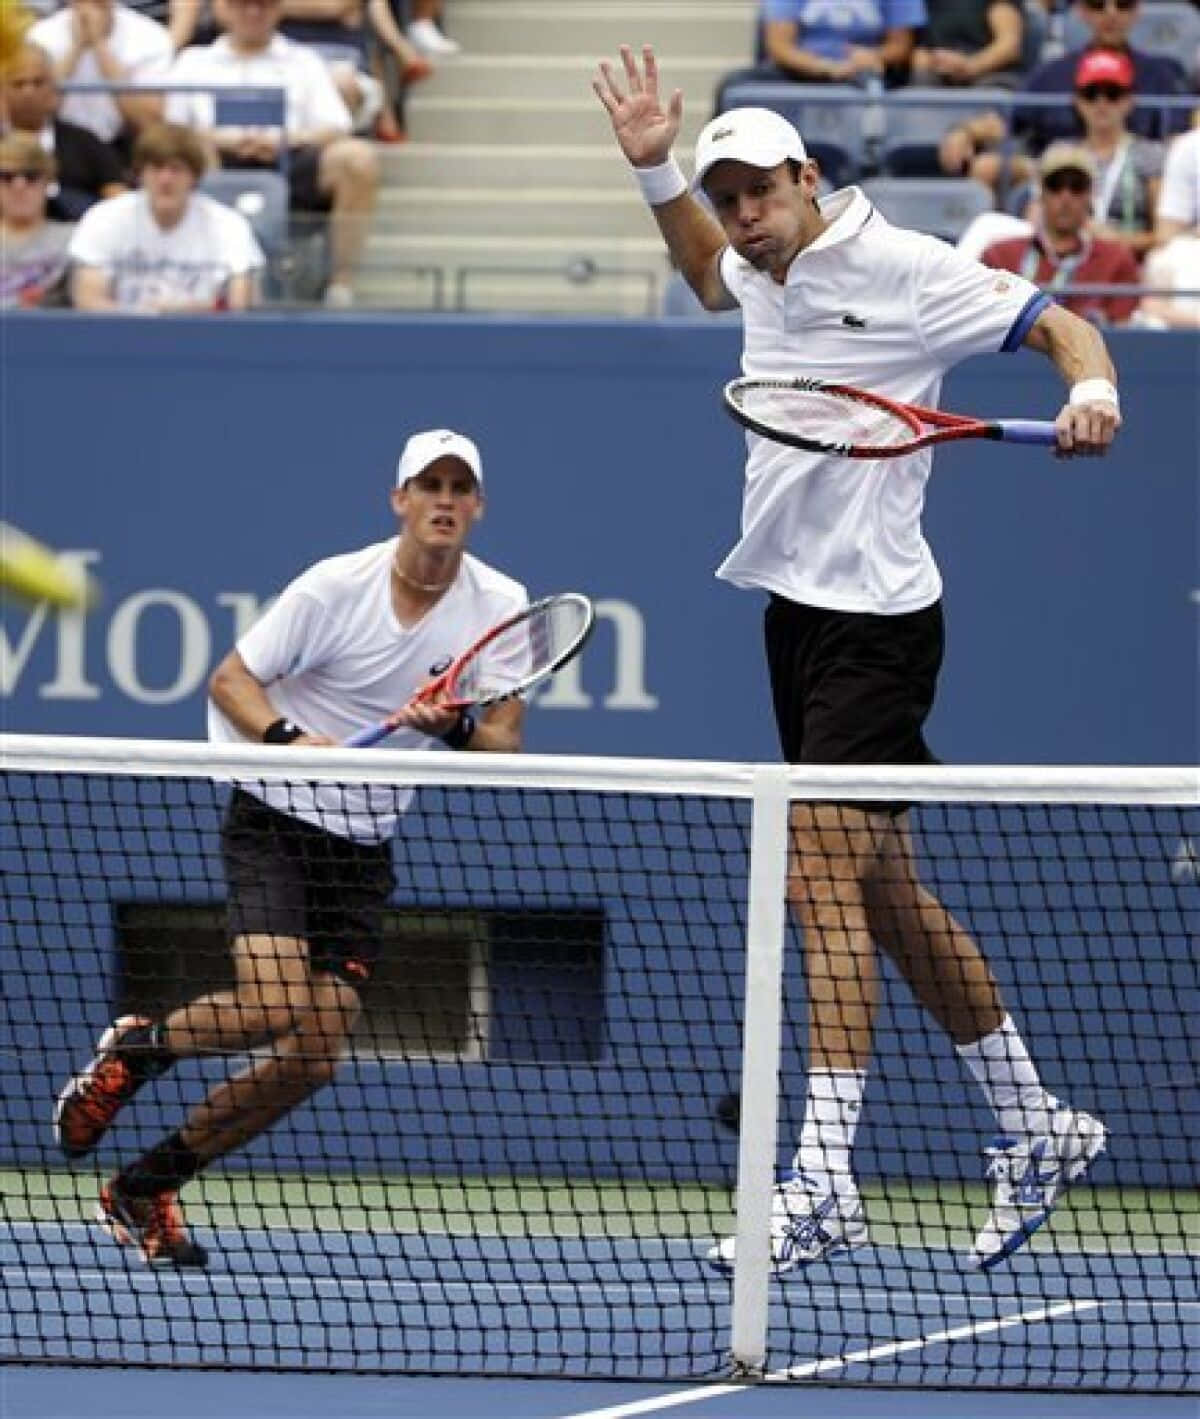 Famous Tennis Player Daniel Nestor with His Partner at the US Open Wallpaper